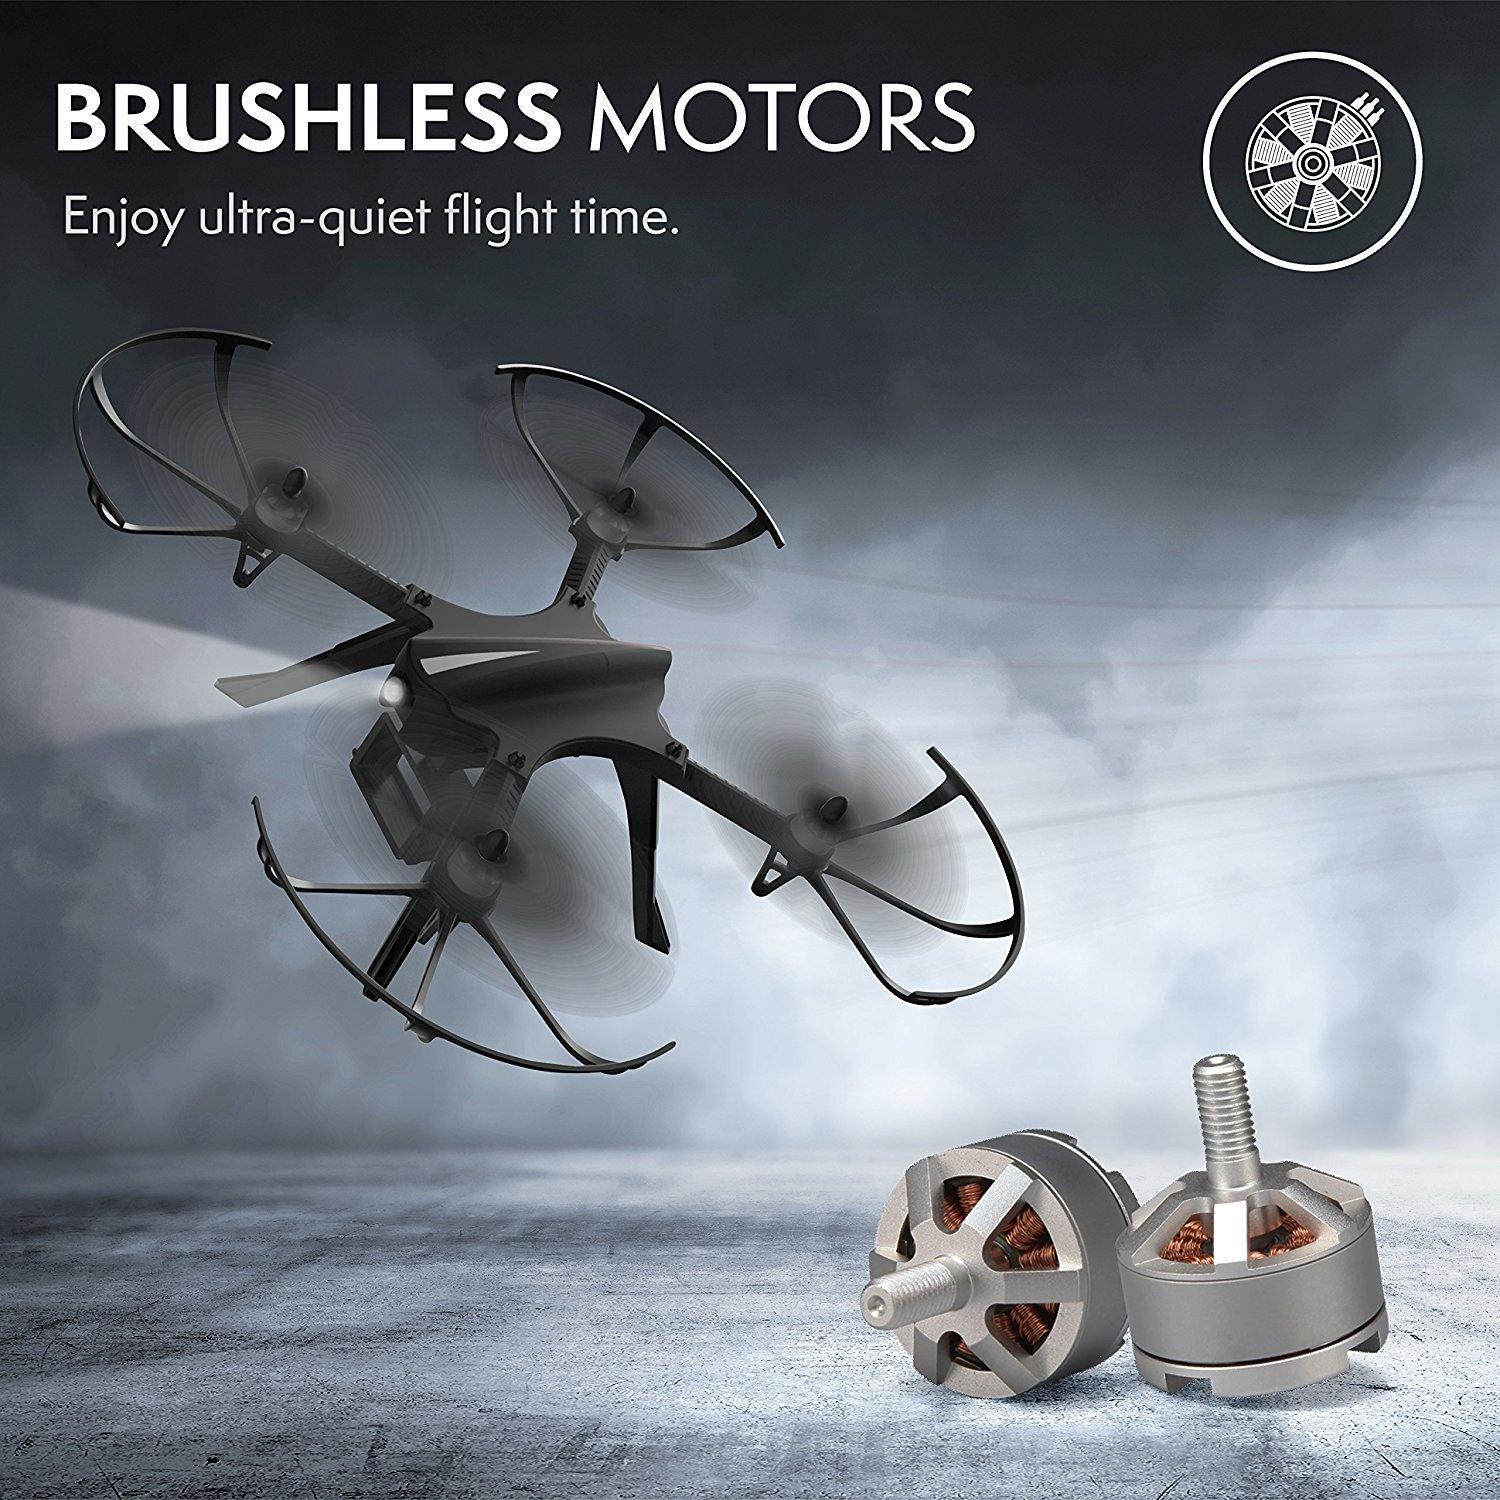 force1 f100 brushless drone